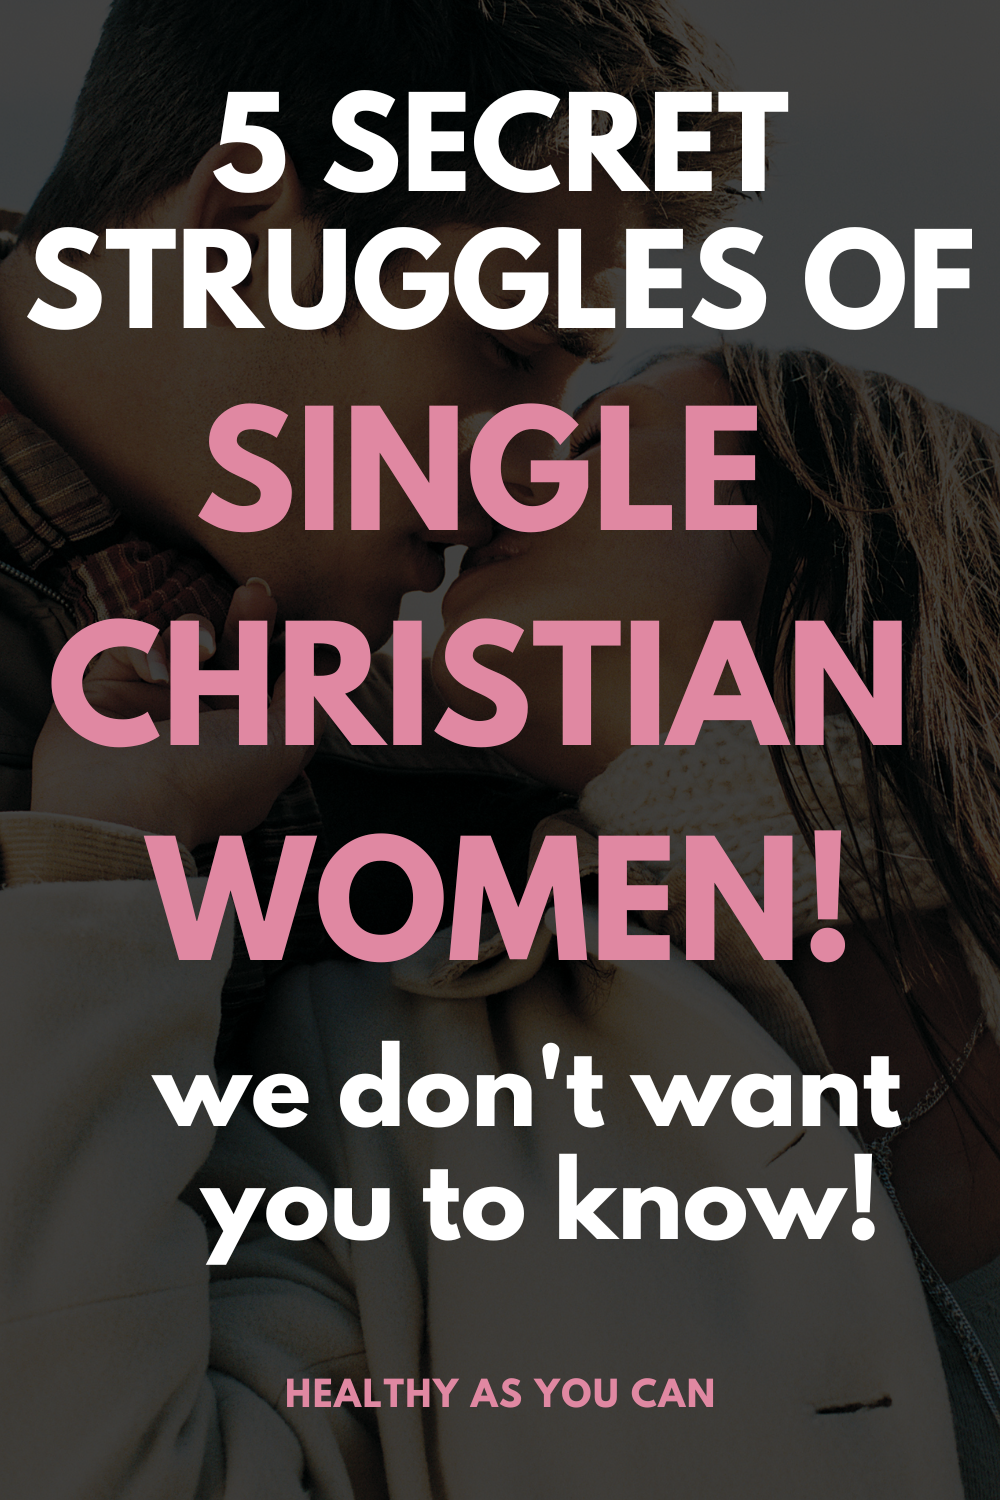 black overlay couple in the background struggles of single Christian women